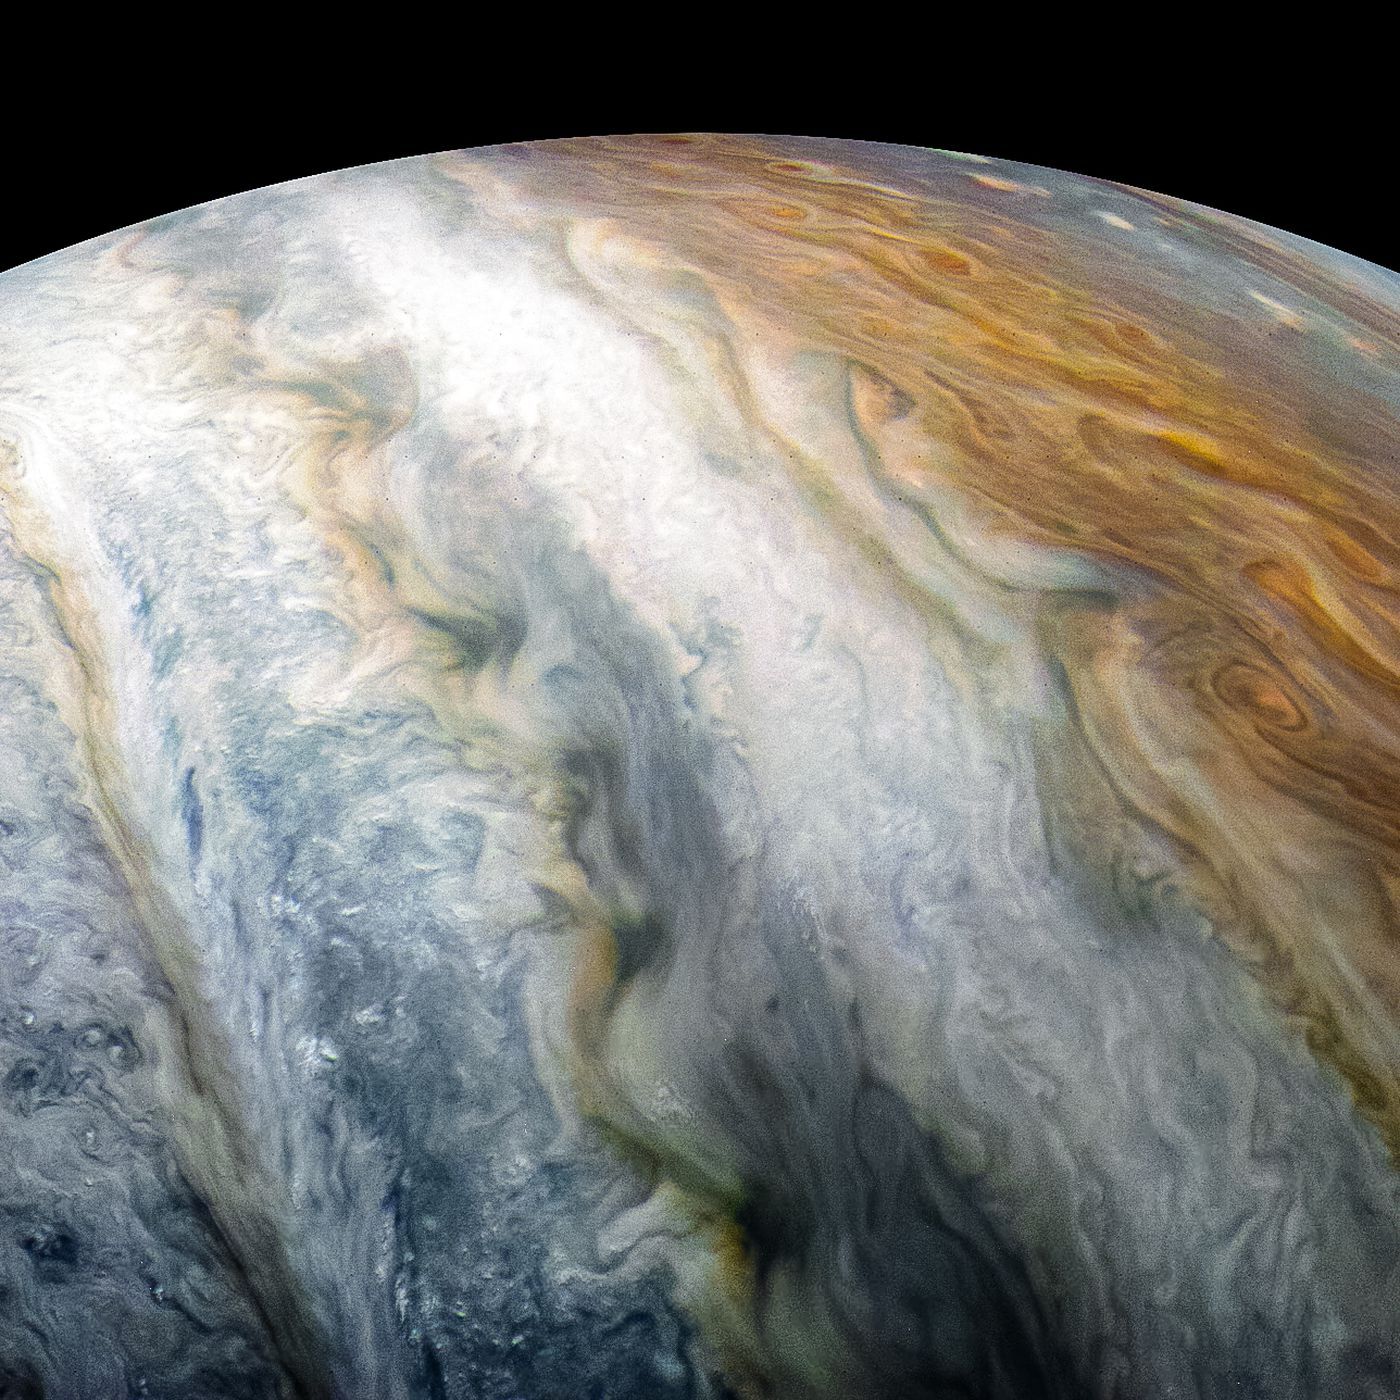 Jupiter Photo: 13 awesome image of the gas giant planet